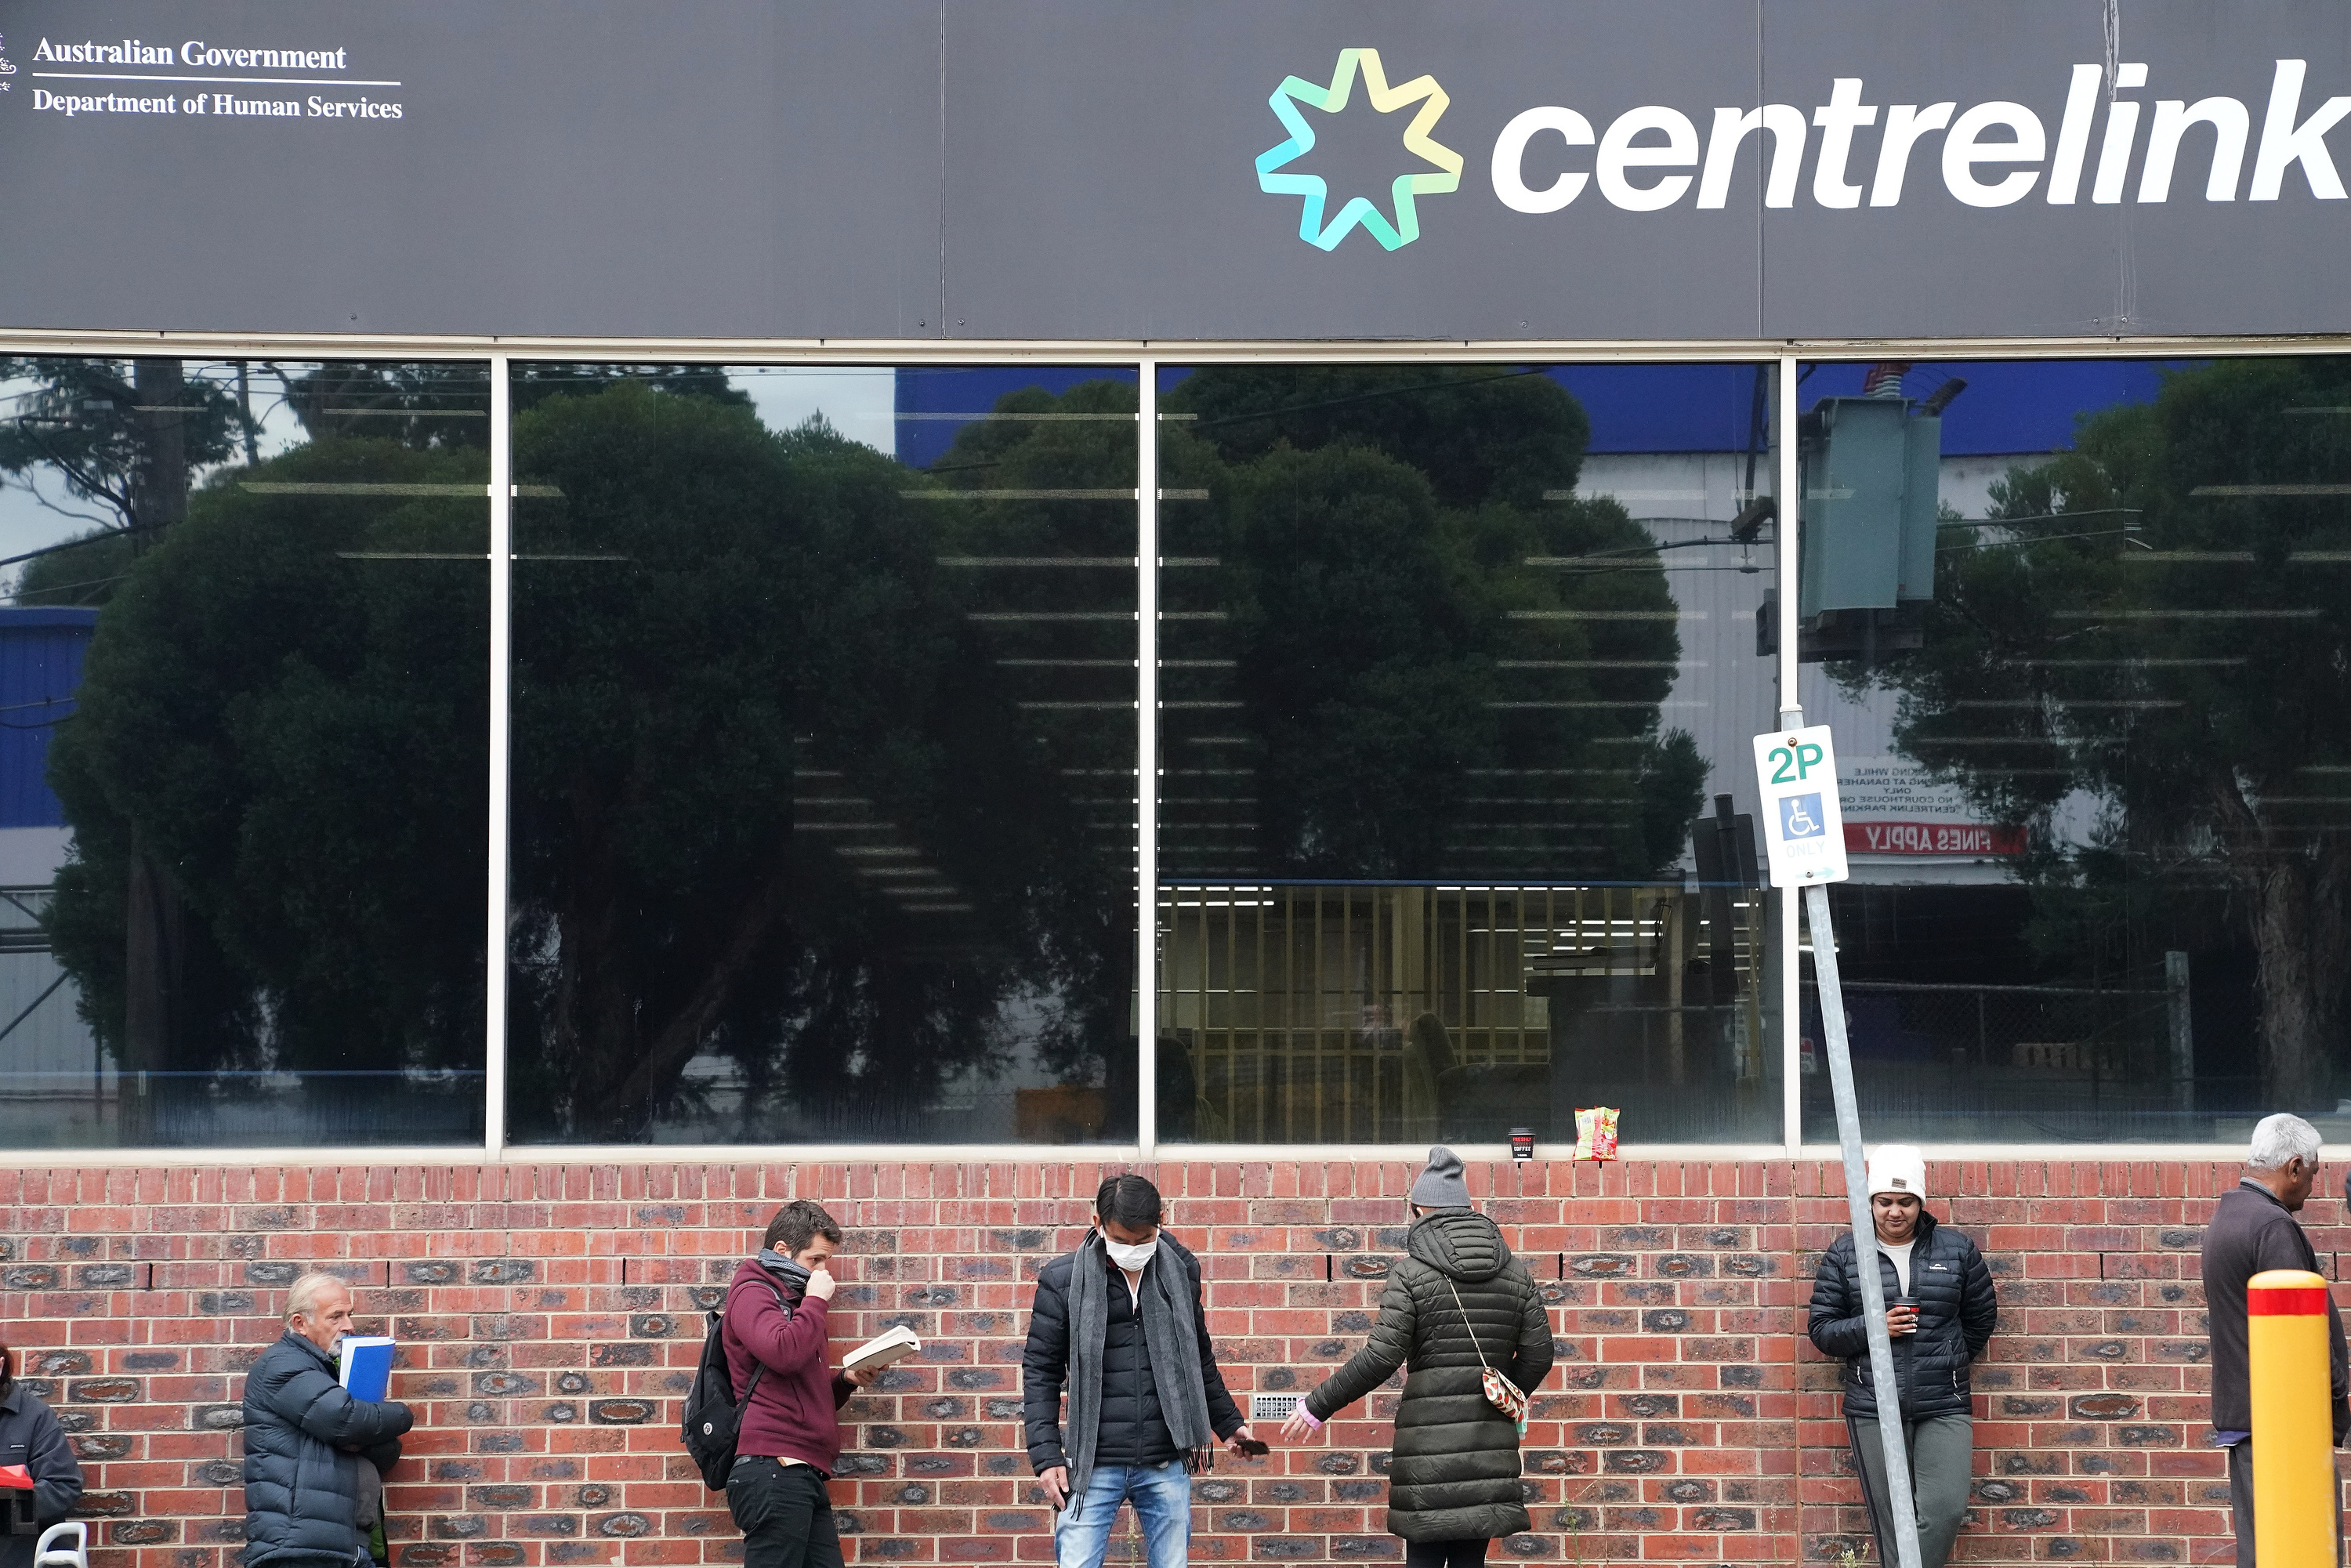 People are seen queuing outside a yet to open Centrelink office in Heidelberg, Melbourne, Tuesday, 